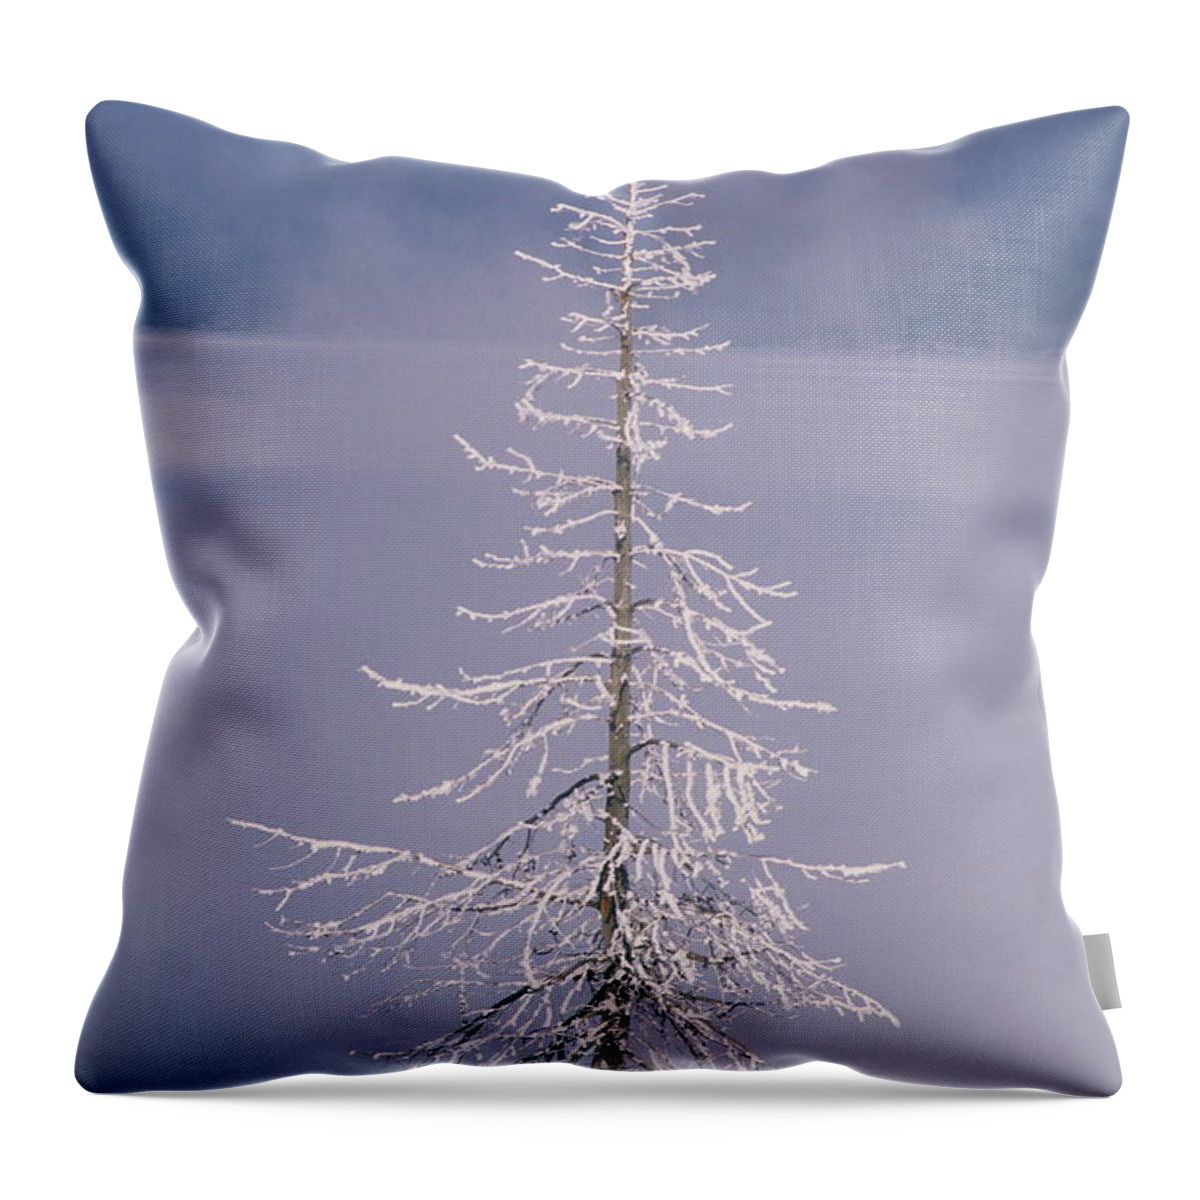 Lodgepole Pine Throw Pillow featuring the photograph Frost On Lodgepole Pine by Gail Shumway